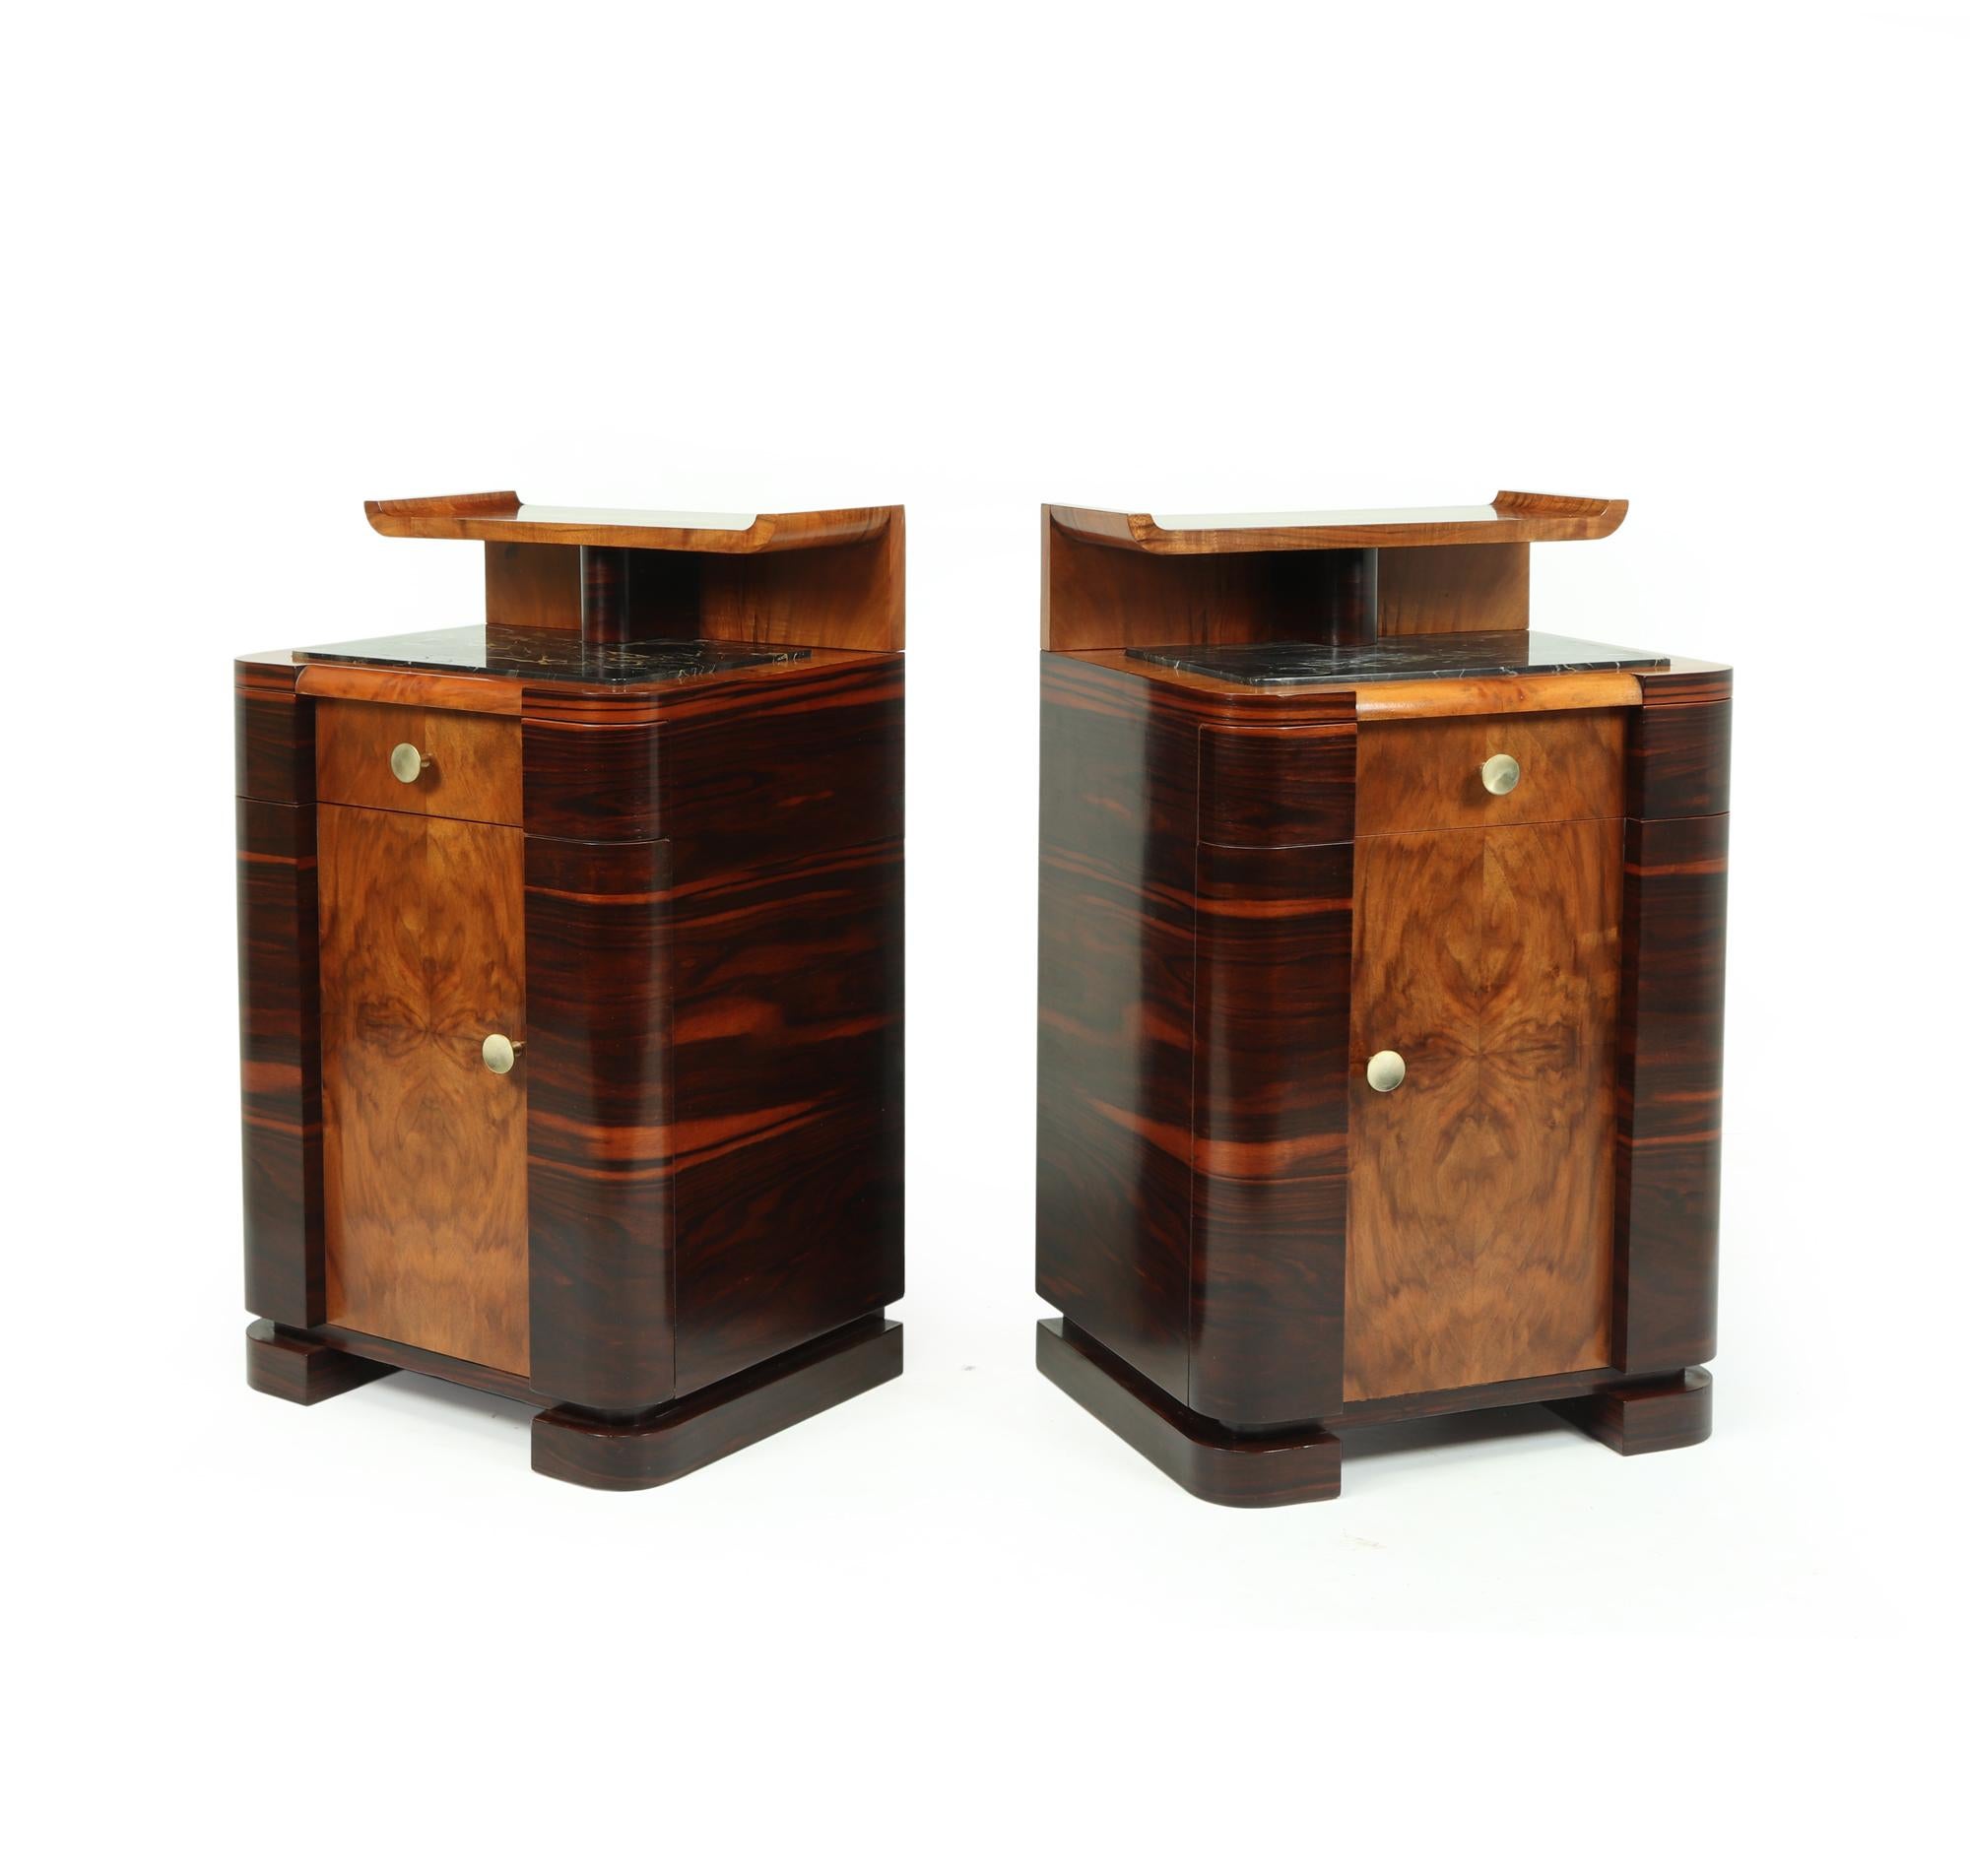 An opposing pair of Art Deco bedside cabinets produced in Italy in the 1930’s, using Macassar ebony and figured walnut, having a single drawer and cupboard below, inset Portoro marble tops with a Chinese influenced up-stand to the back

The